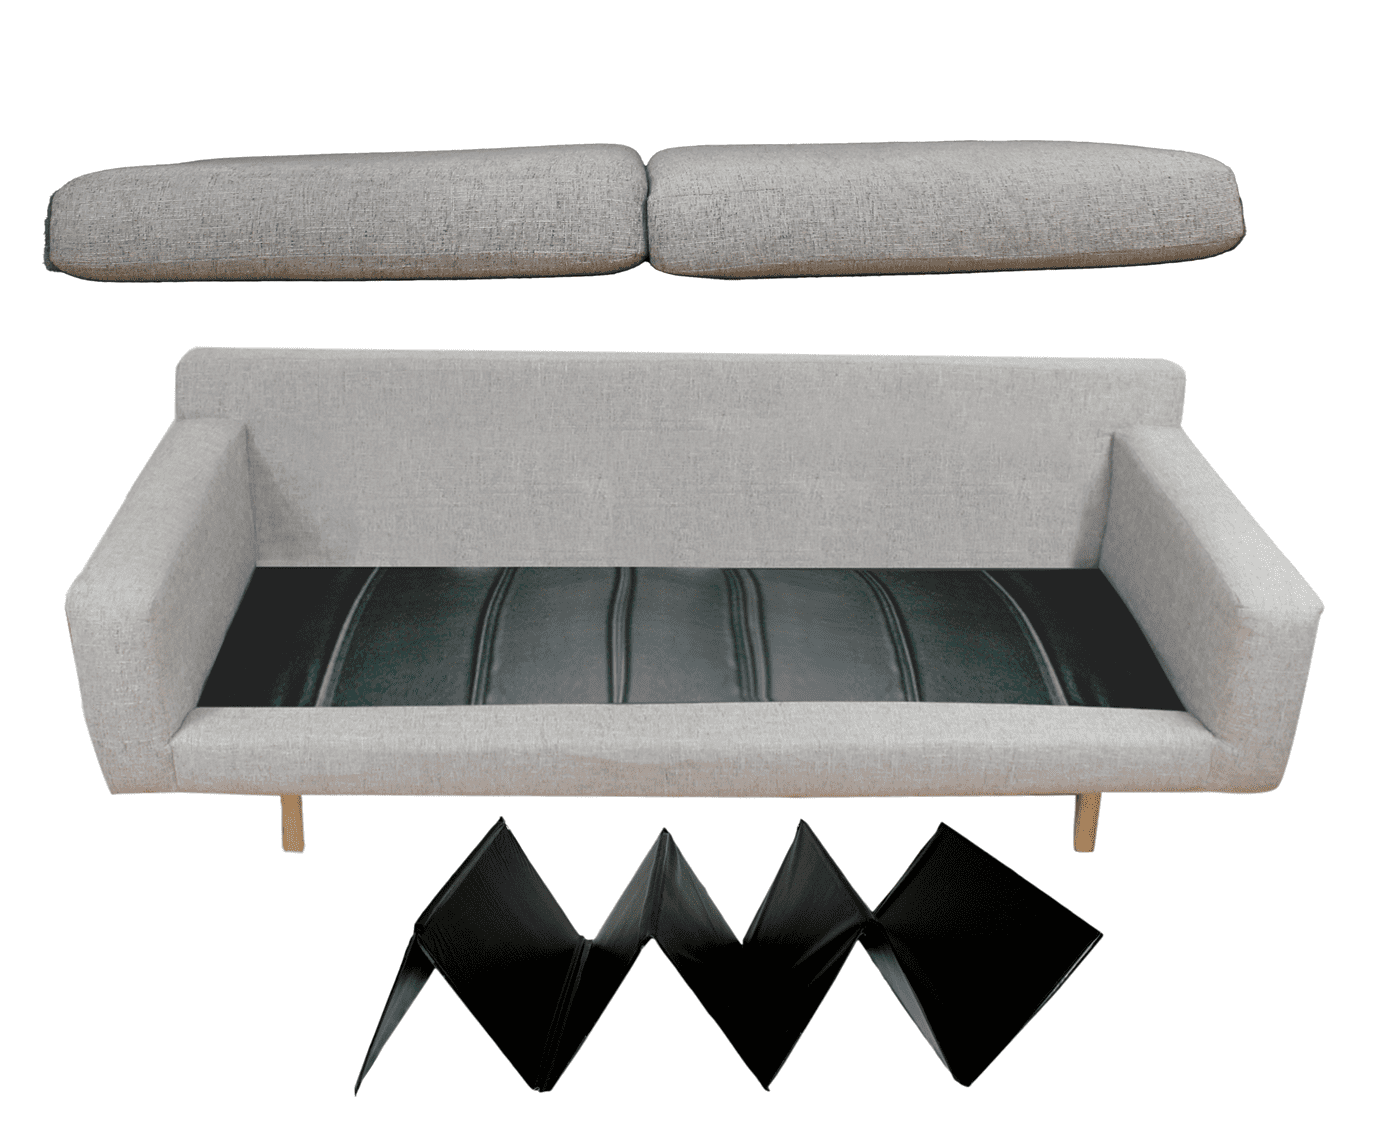 Couch Cushion Support - Upgraded Sofa Cushion Support for Sagging Seat  [19.7